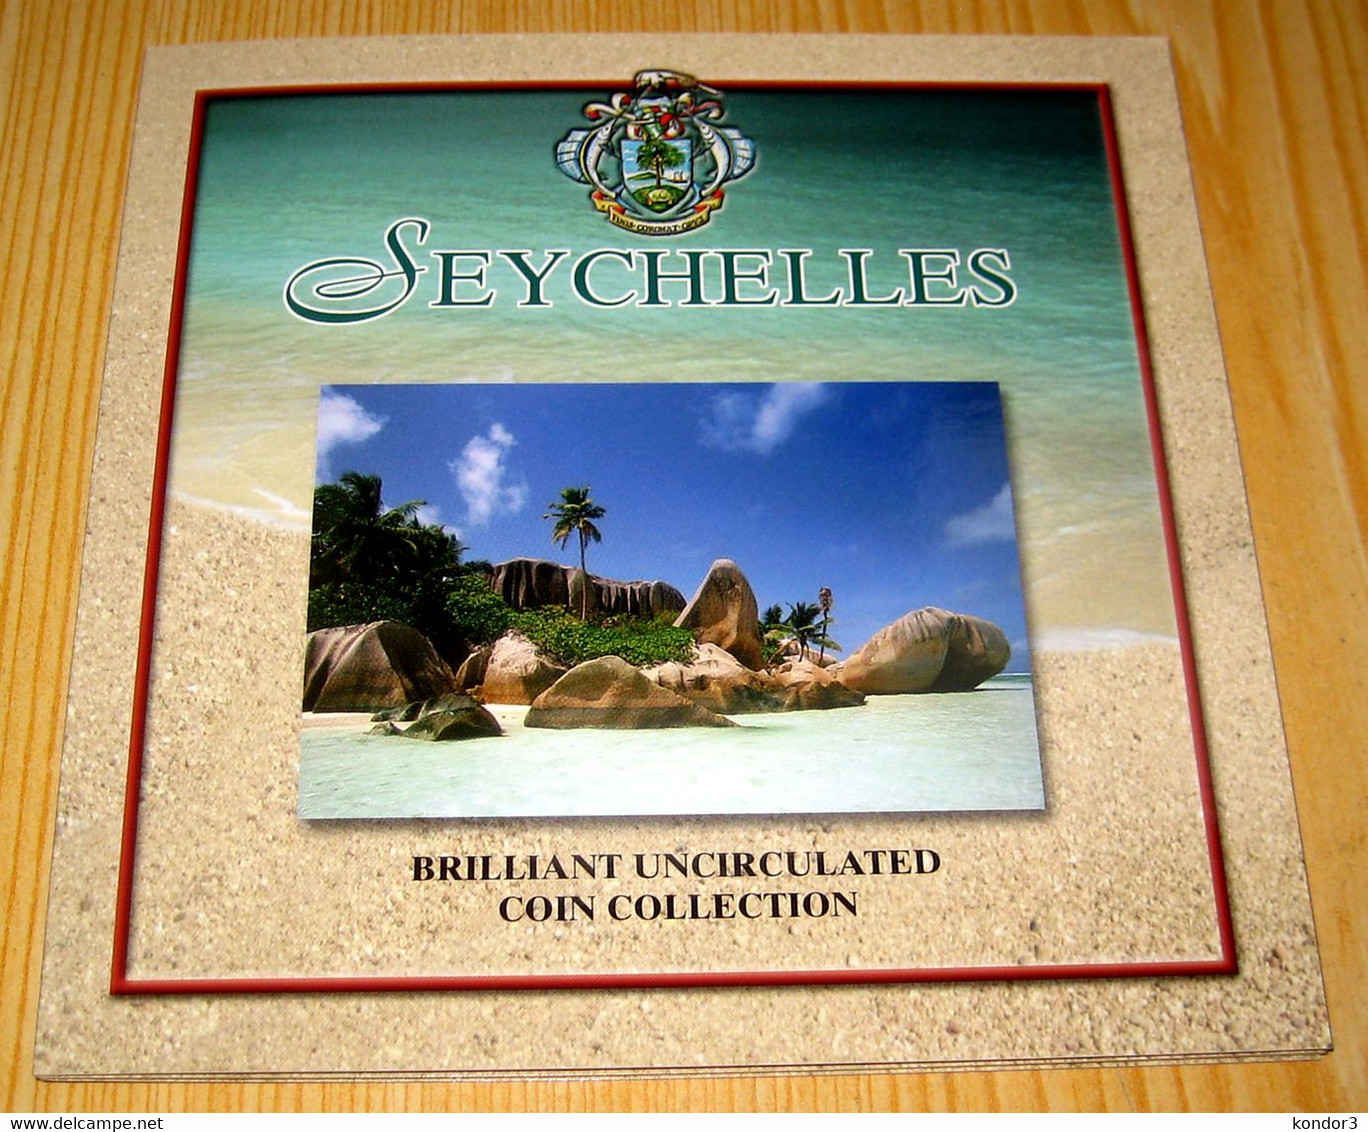 Seychelles. Brilliant Uncirculated Coin Collection - Seychelles